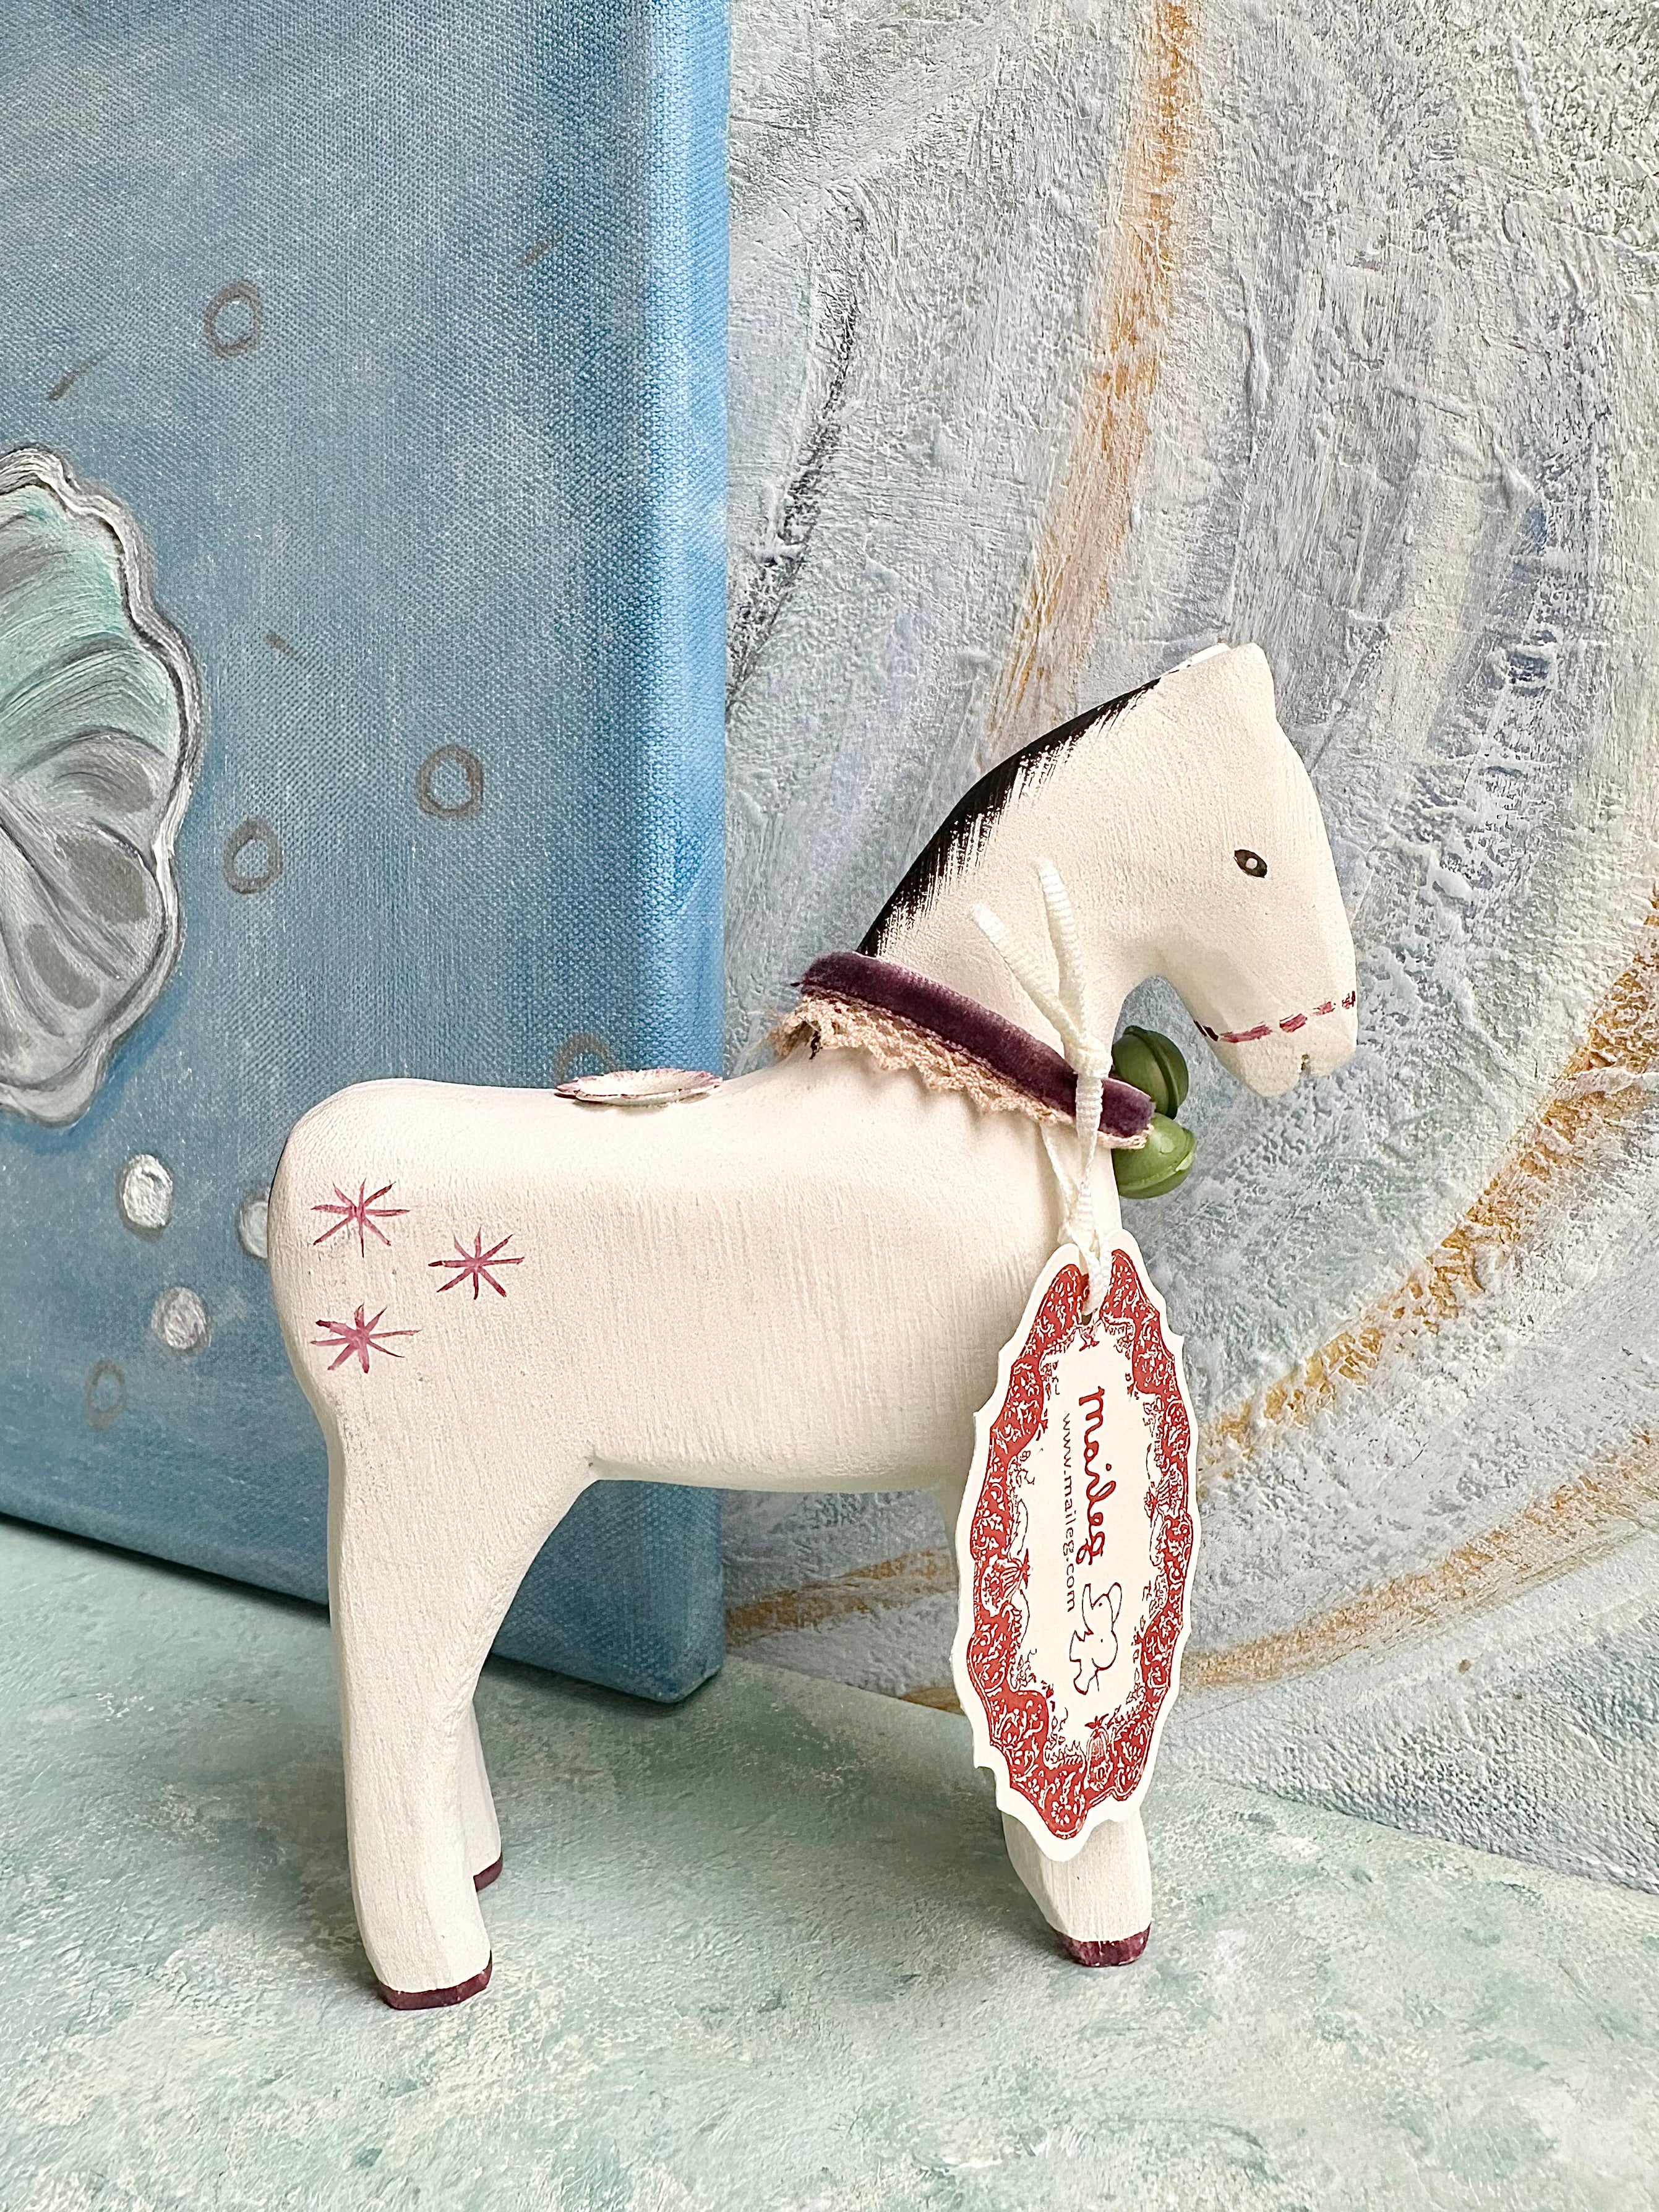 Small Horse for Candle - 2009